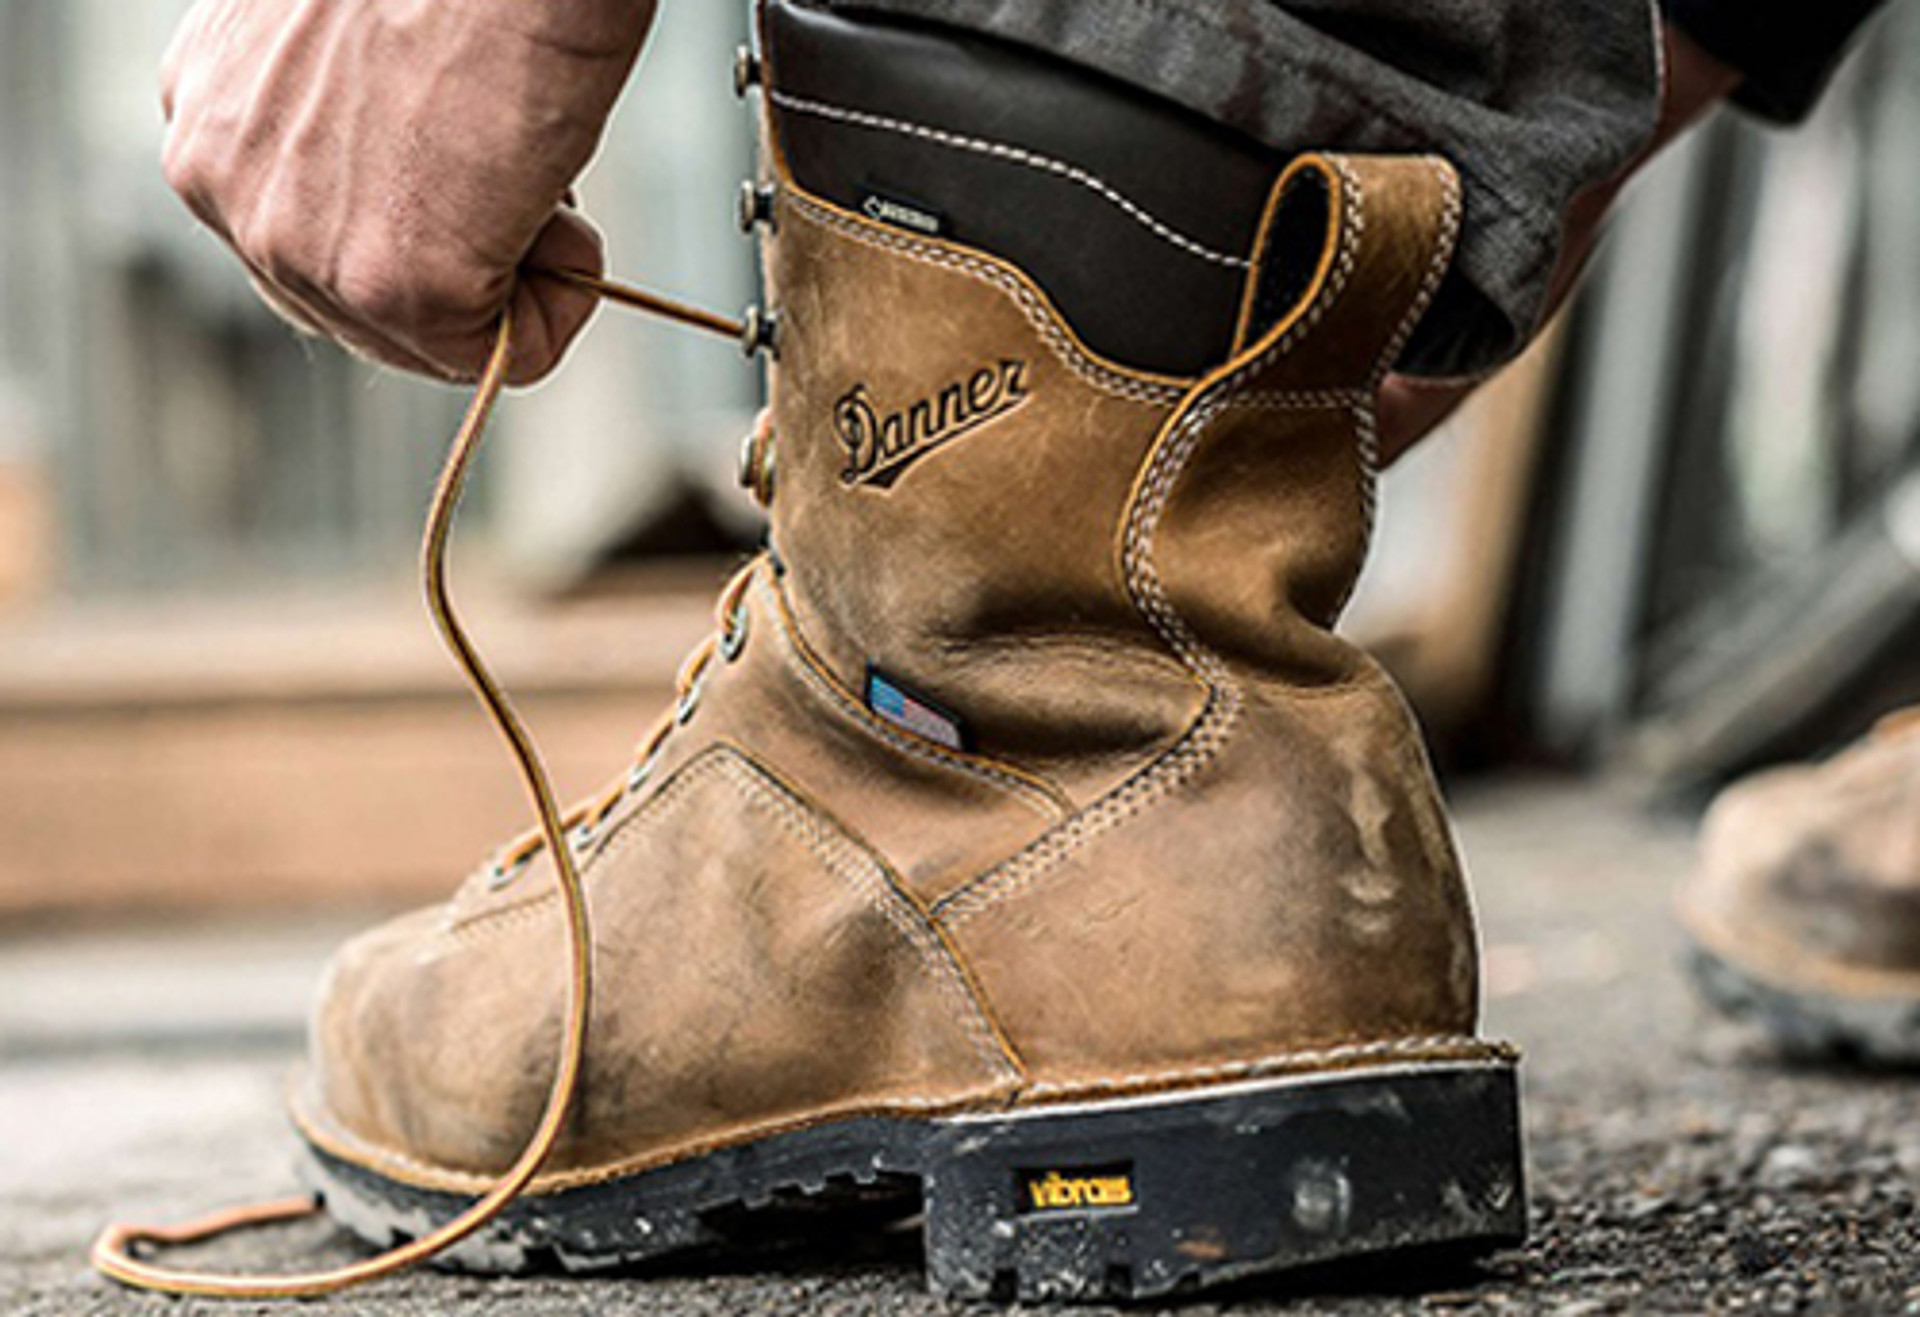 The Best Landscaping and Landscape Construction Boots Family Footwear